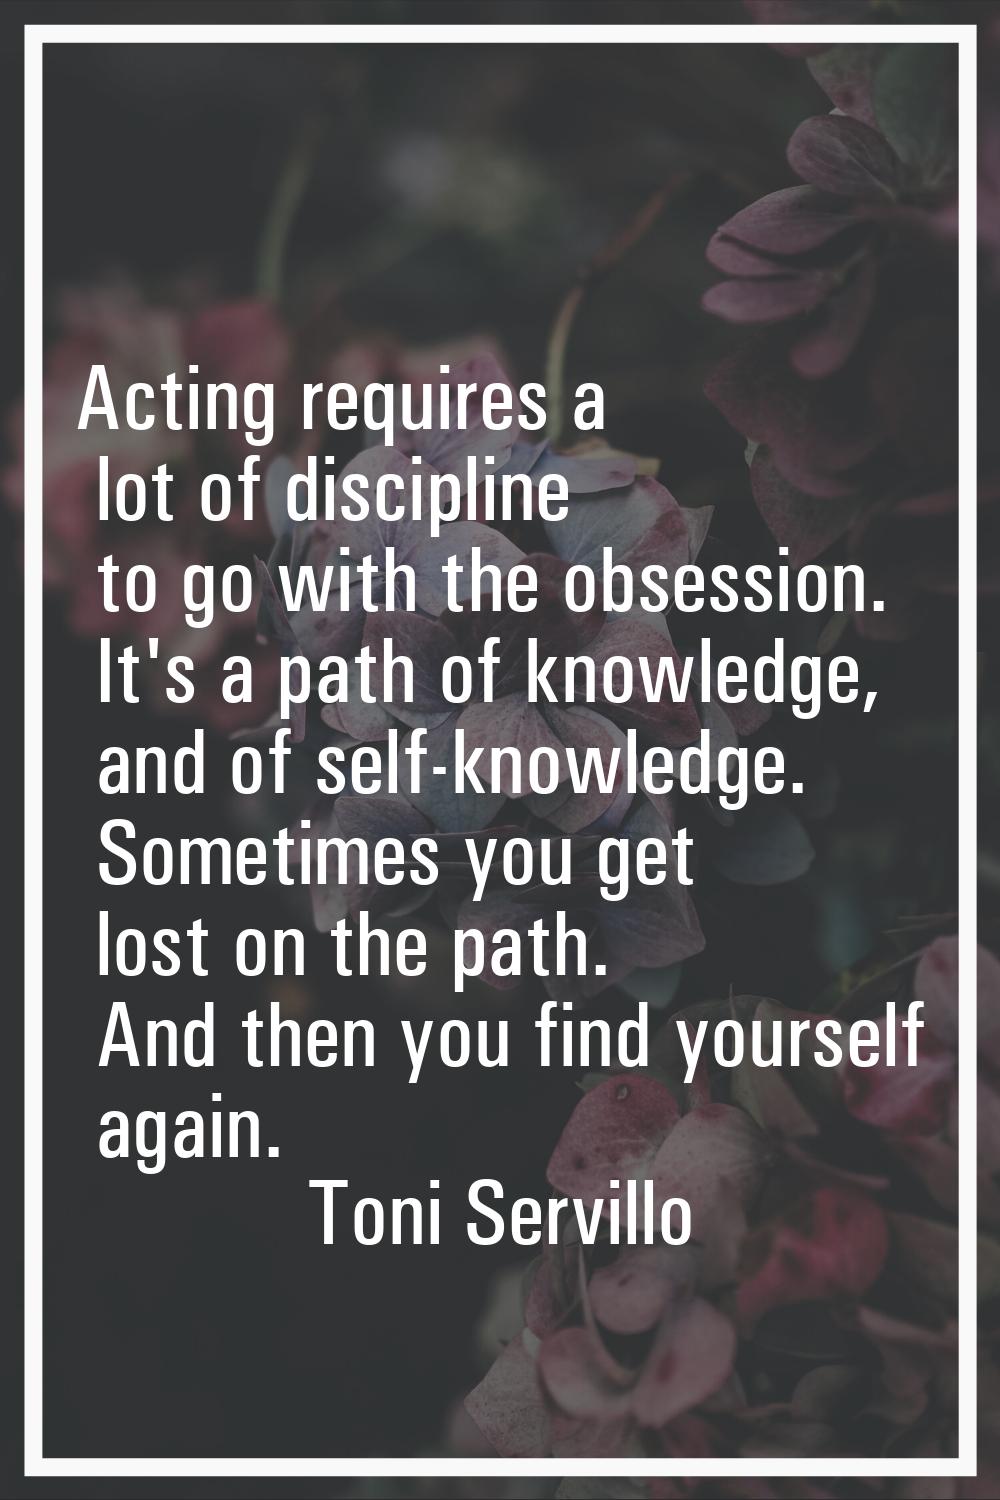 Acting requires a lot of discipline to go with the obsession. It's a path of knowledge, and of self